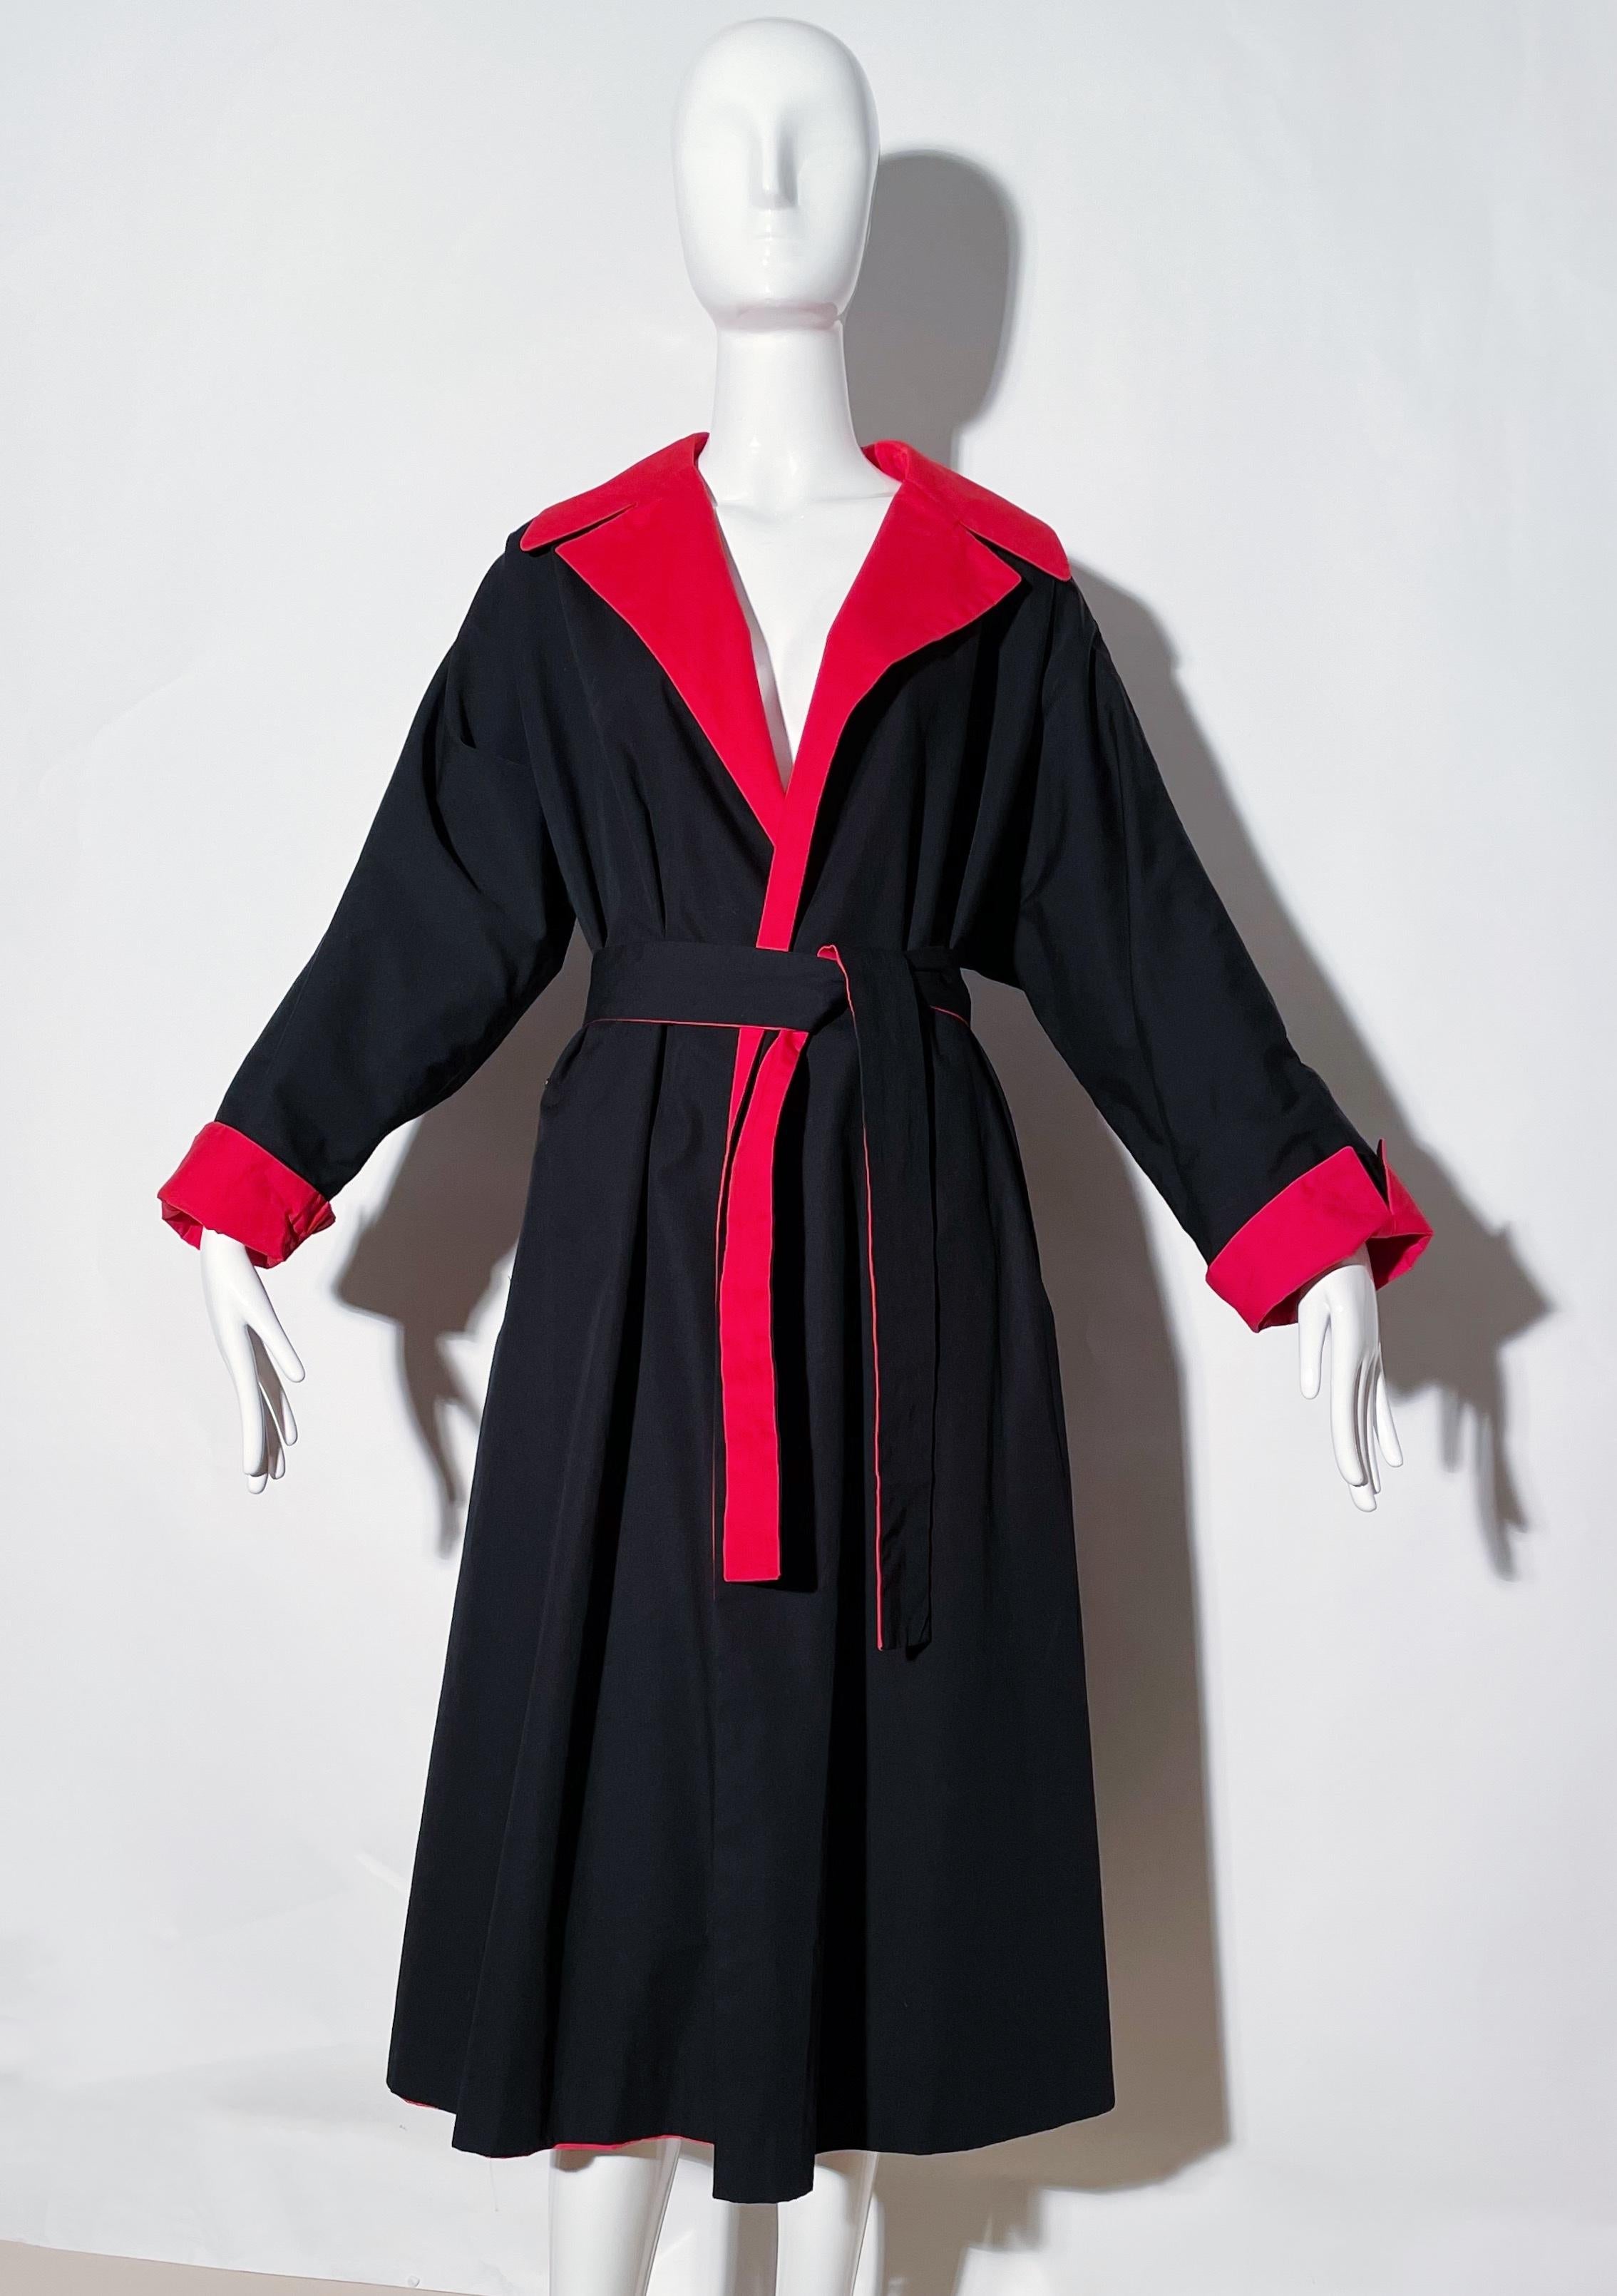 Red/ Black trench coat. Reversible. Side pockets. Collared. Belted, removeable. Cotton and polyester blend. Made in Hong Kong.
*Condition: excellent vintage condition. No visible flaws.

Measurements Taken Laying Flat (inches)—
Shoulder to Shoulder: